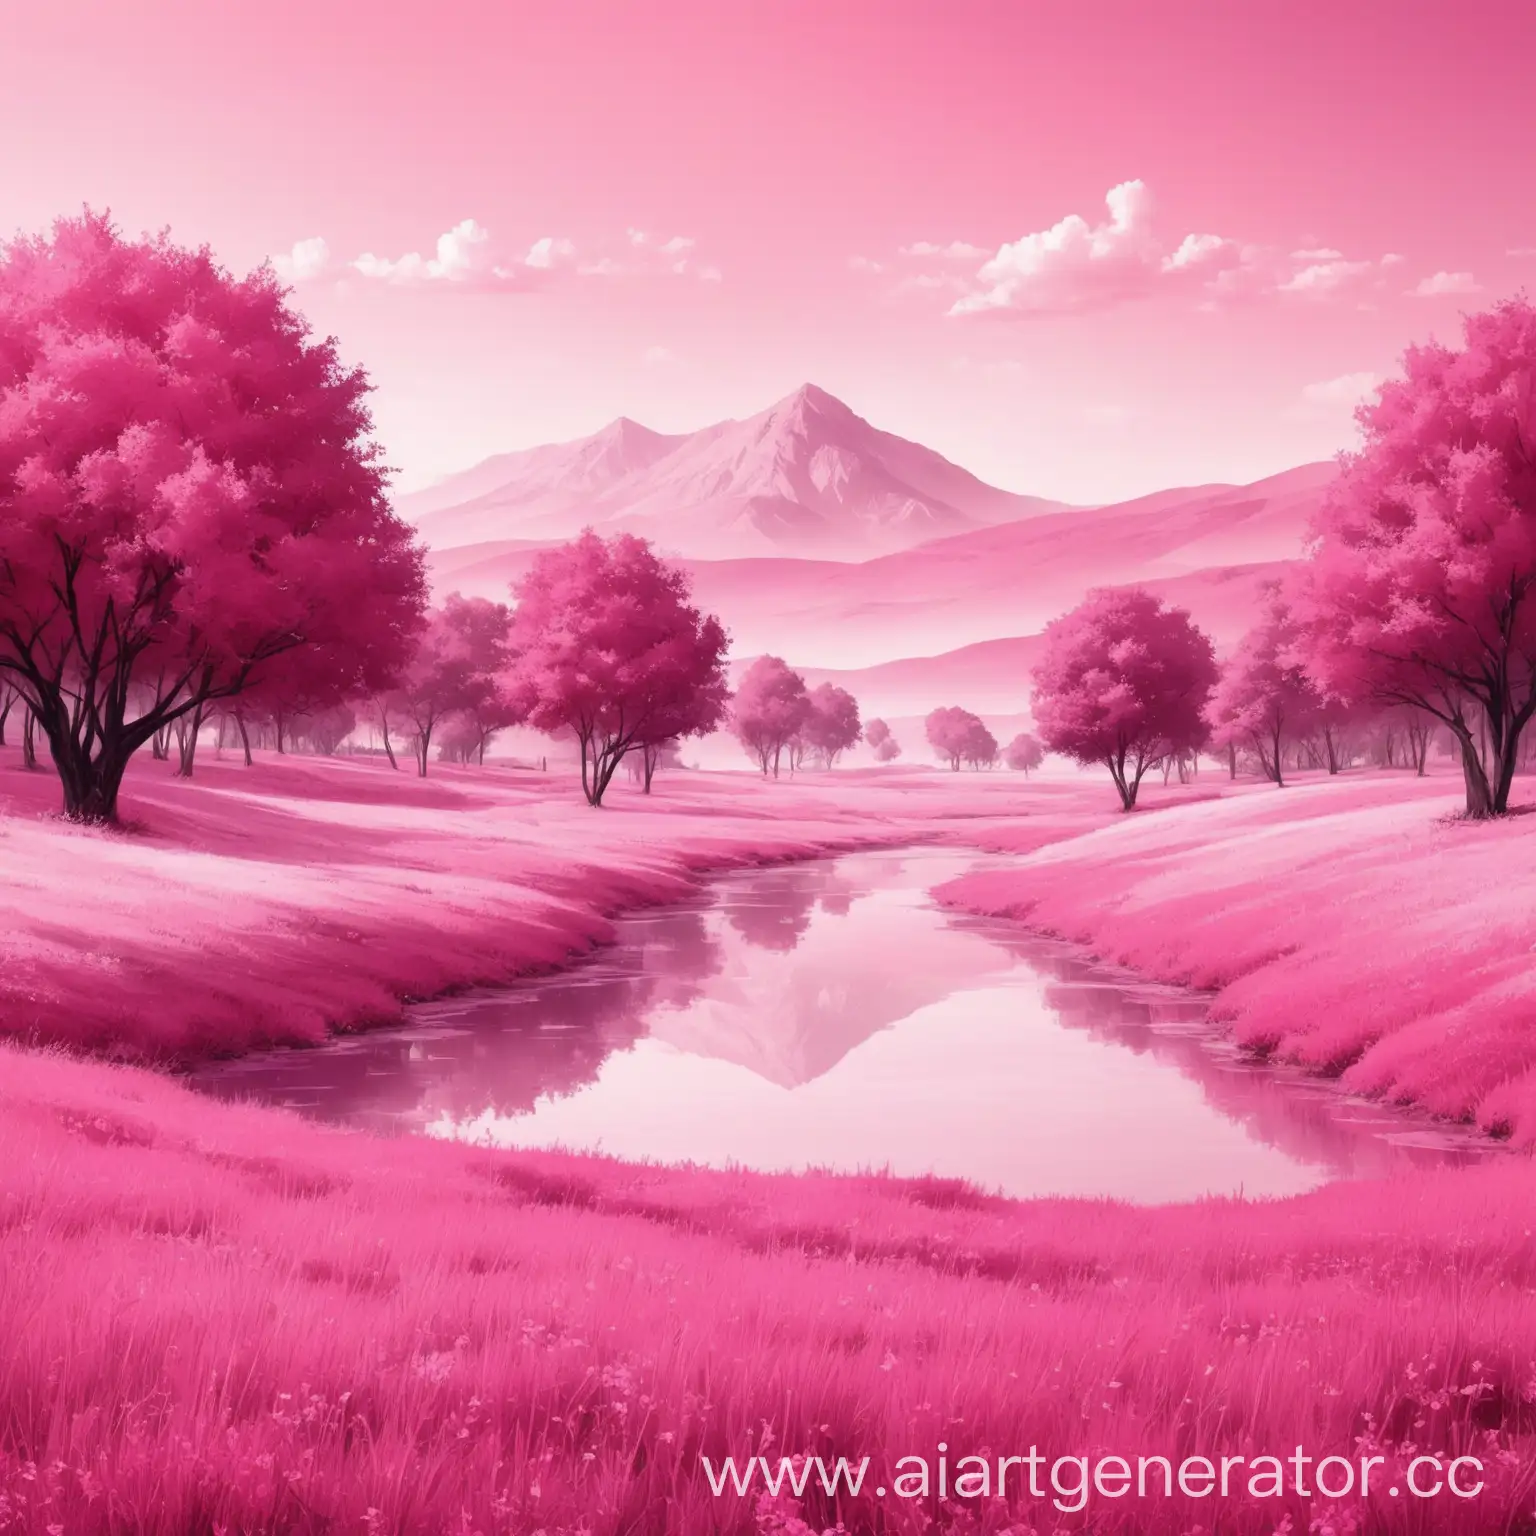 Serenity-in-Pink-Tranquil-Landscape-Bathed-in-Soft-Pink-Hues